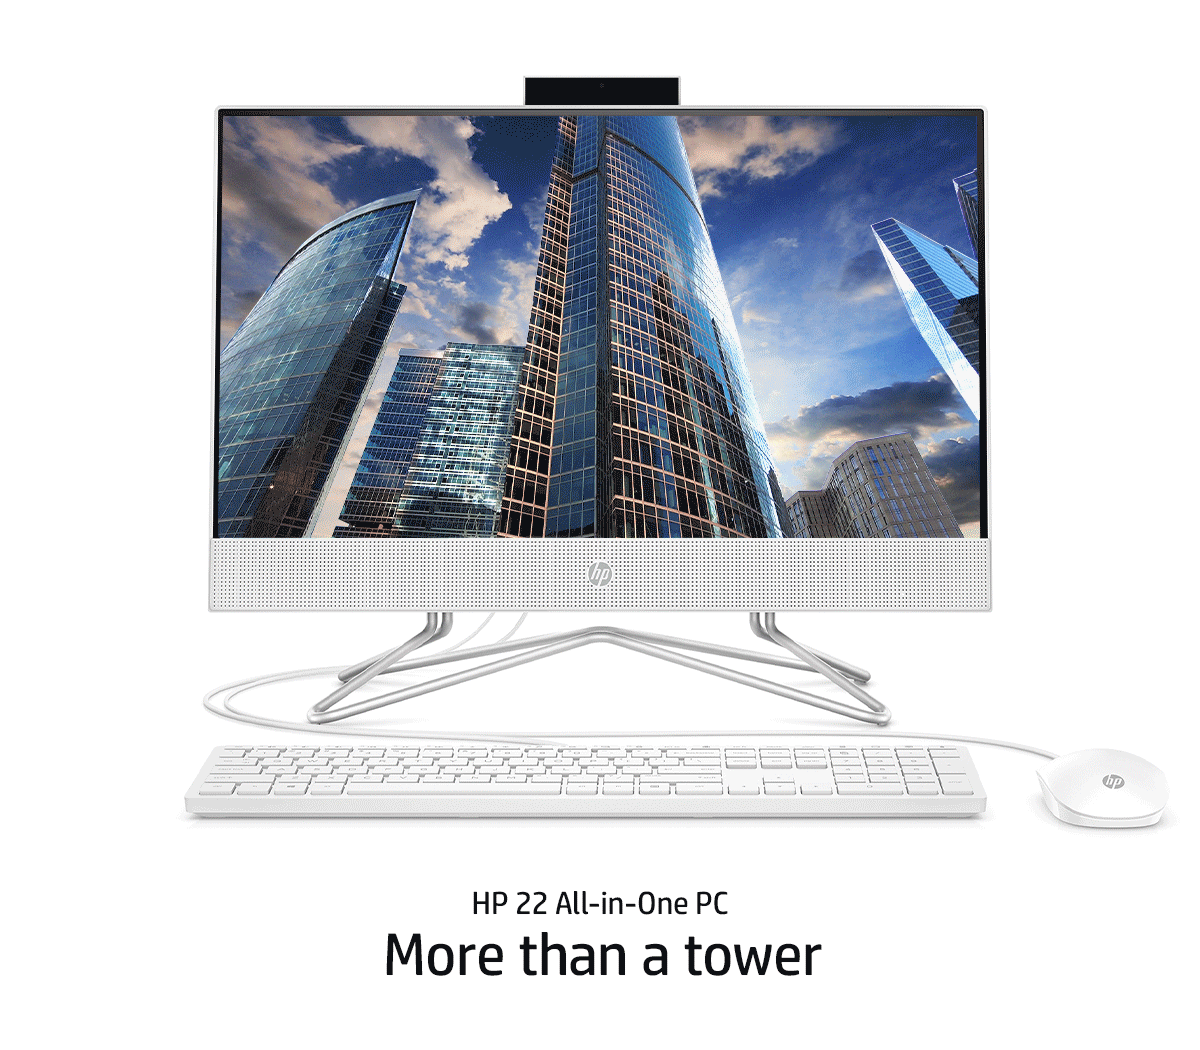 HP 22 All-in-One PC: More than a tower